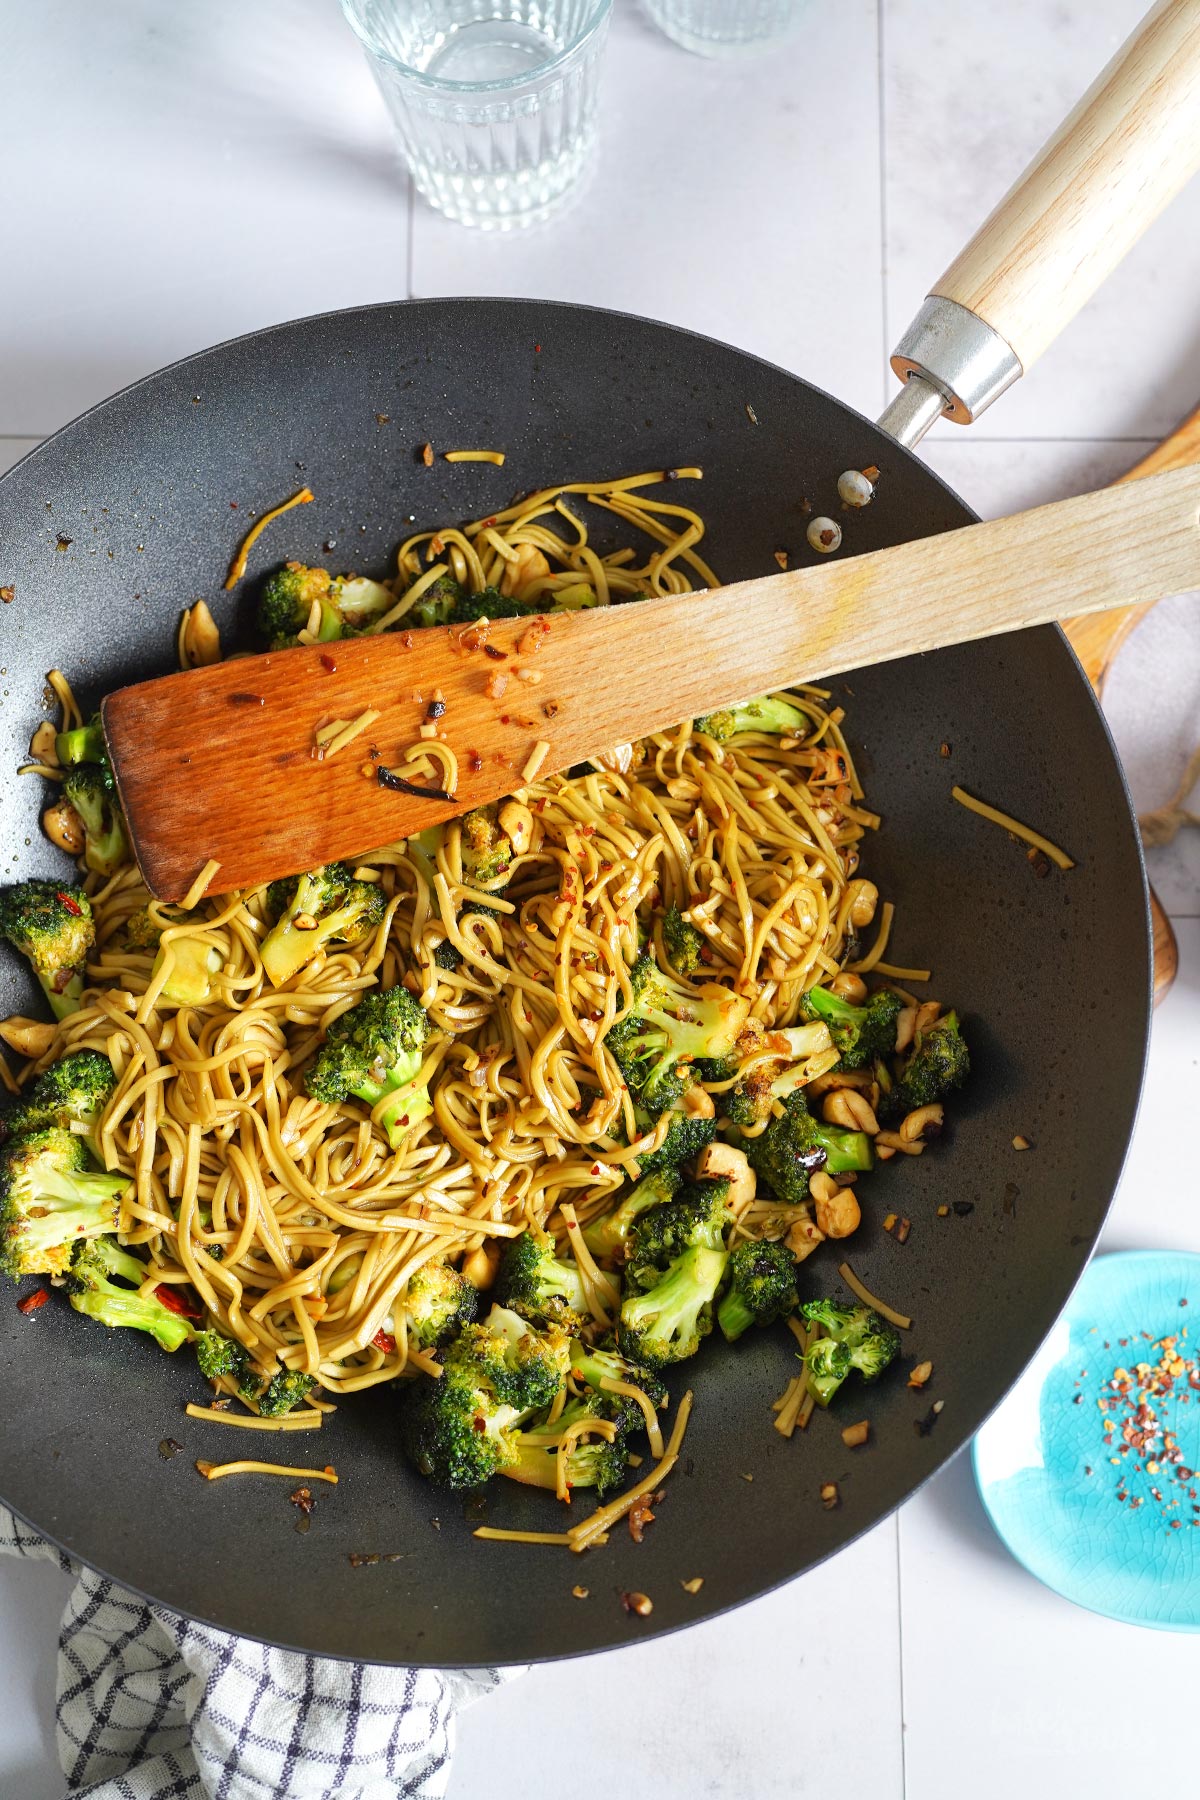 Stir-Fry Honey Broccoli Noodles | Bake to the roots